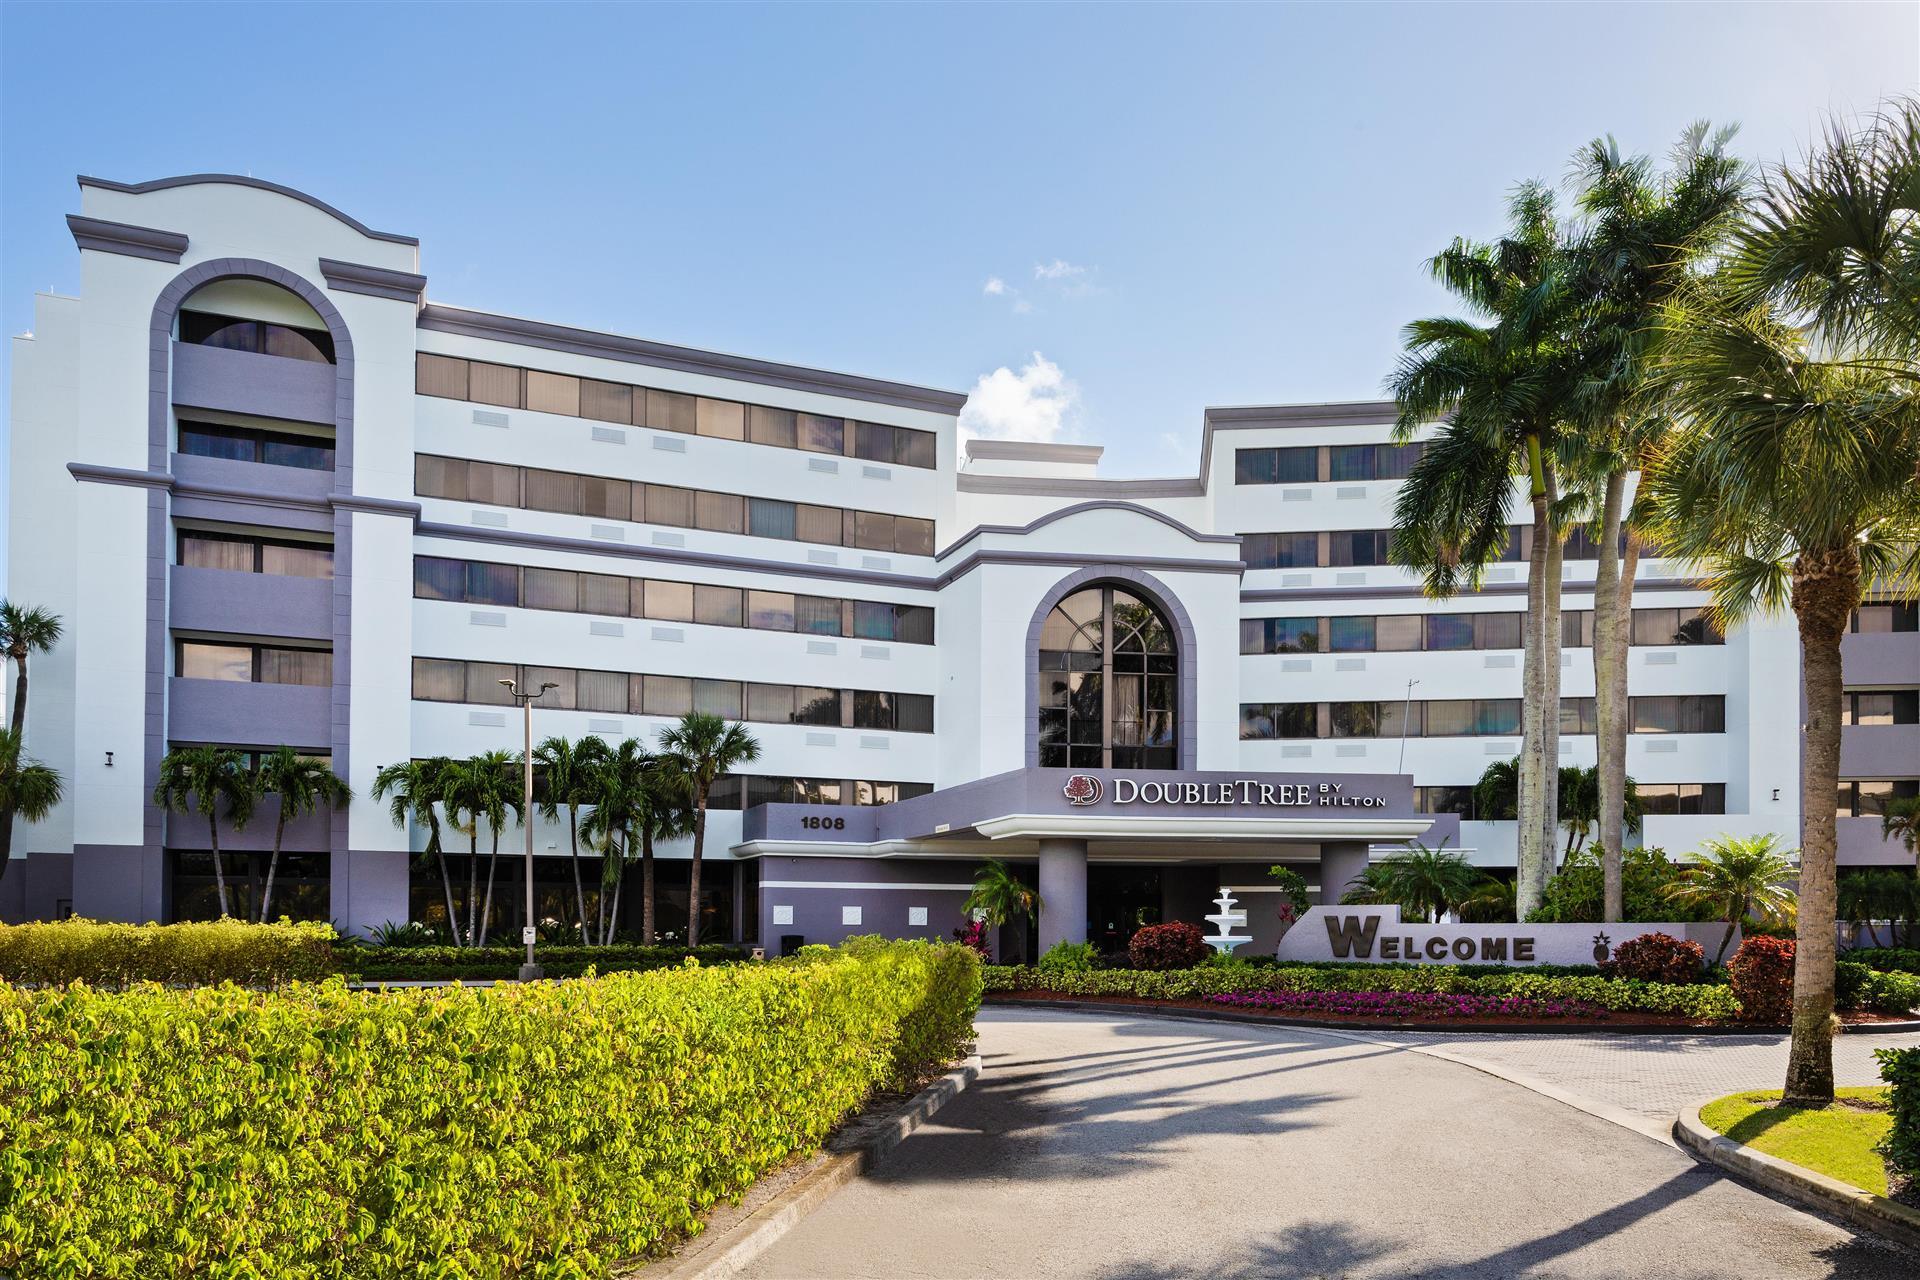 DoubleTree by Hilton Hotel West Palm Beach Airport in West Palm Beach, FL